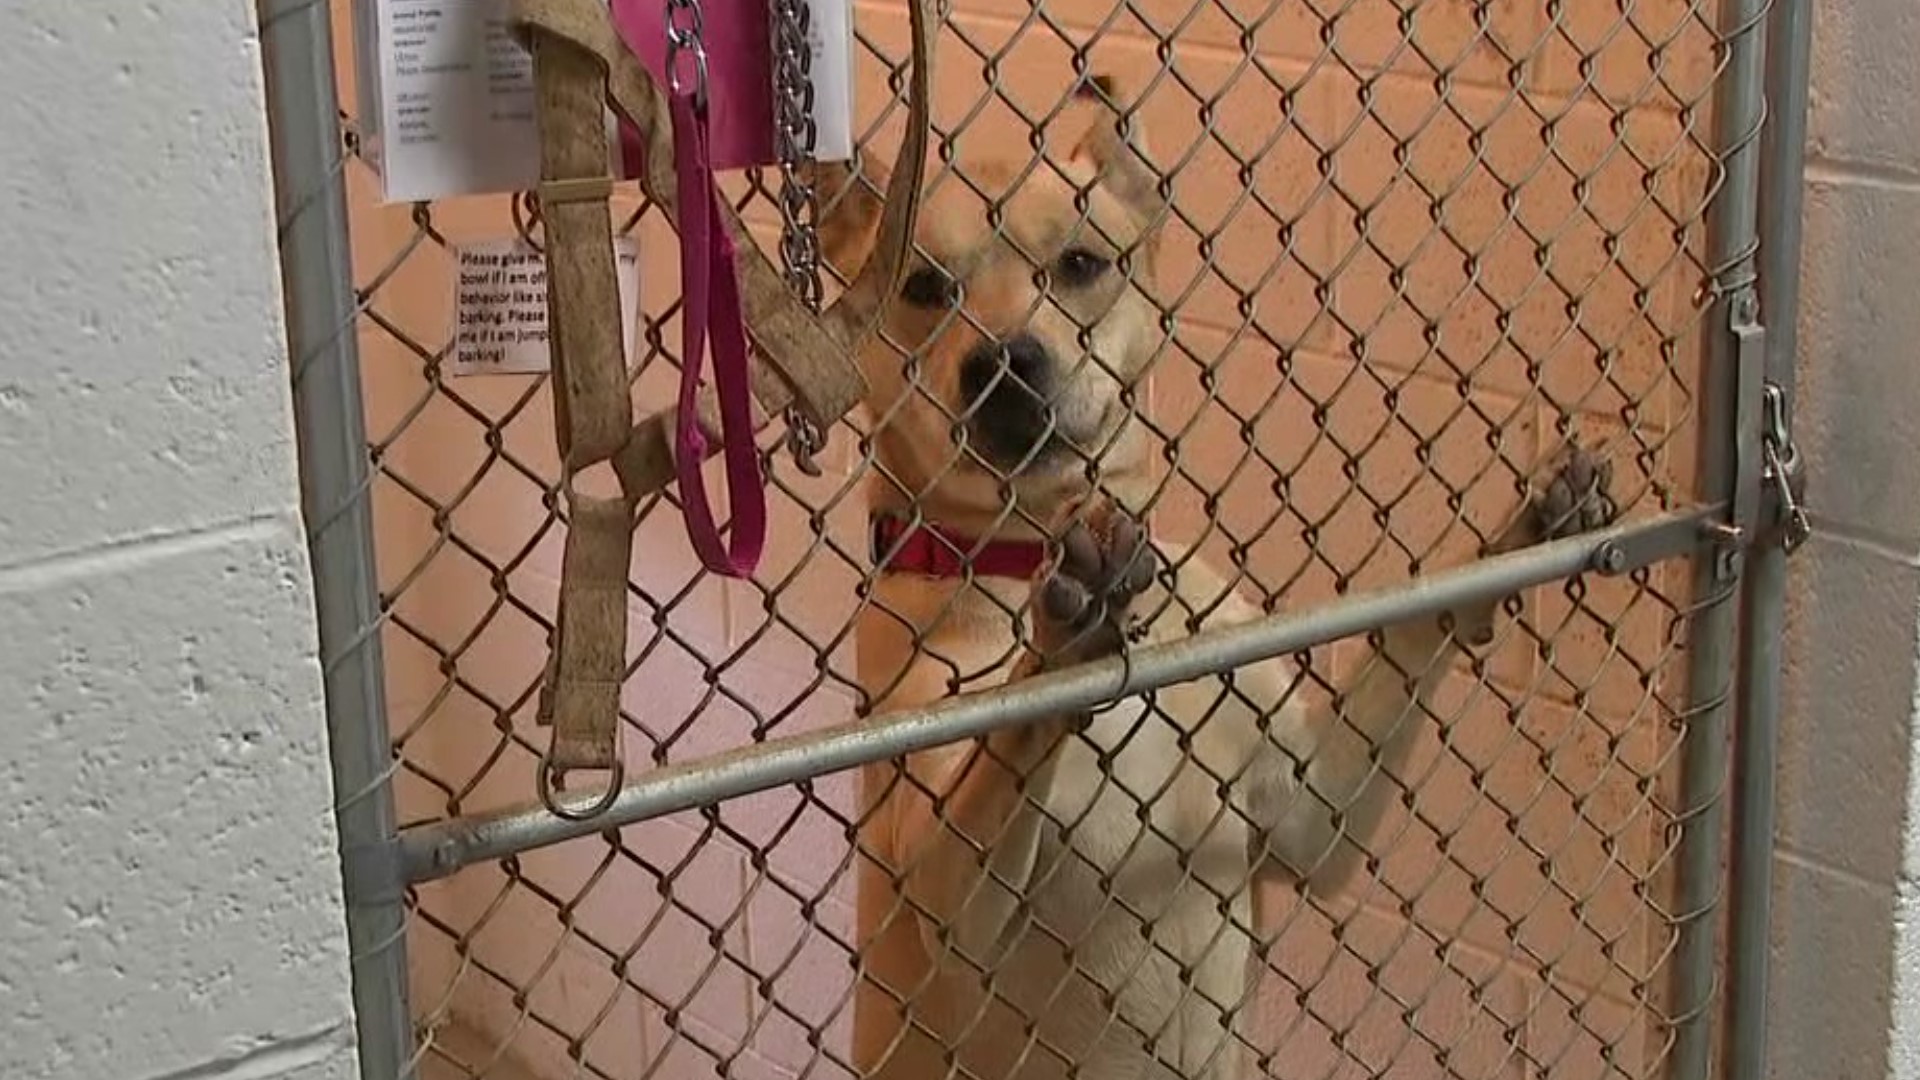 Animal shelters across the country are experiencing the same problems — adoptions are down and surrenders are up.